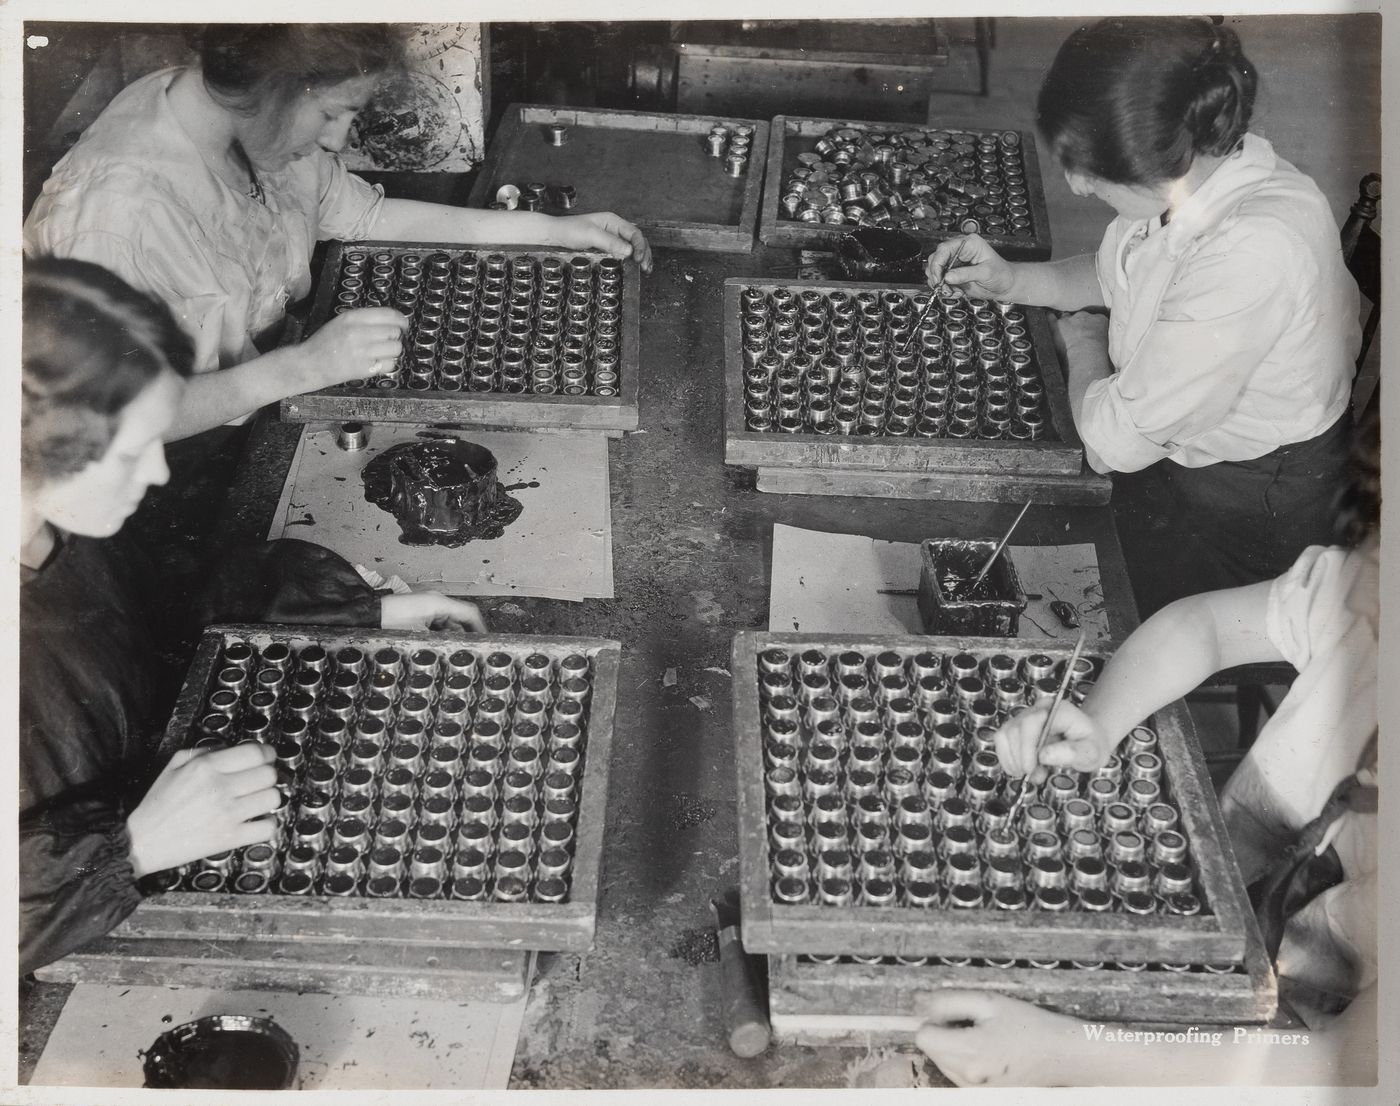 Interior view of workers waterproofing primers at the Energite Explosives Plant No. 3, the Shell Loading Plant, Renfrew, Ontario, Canada